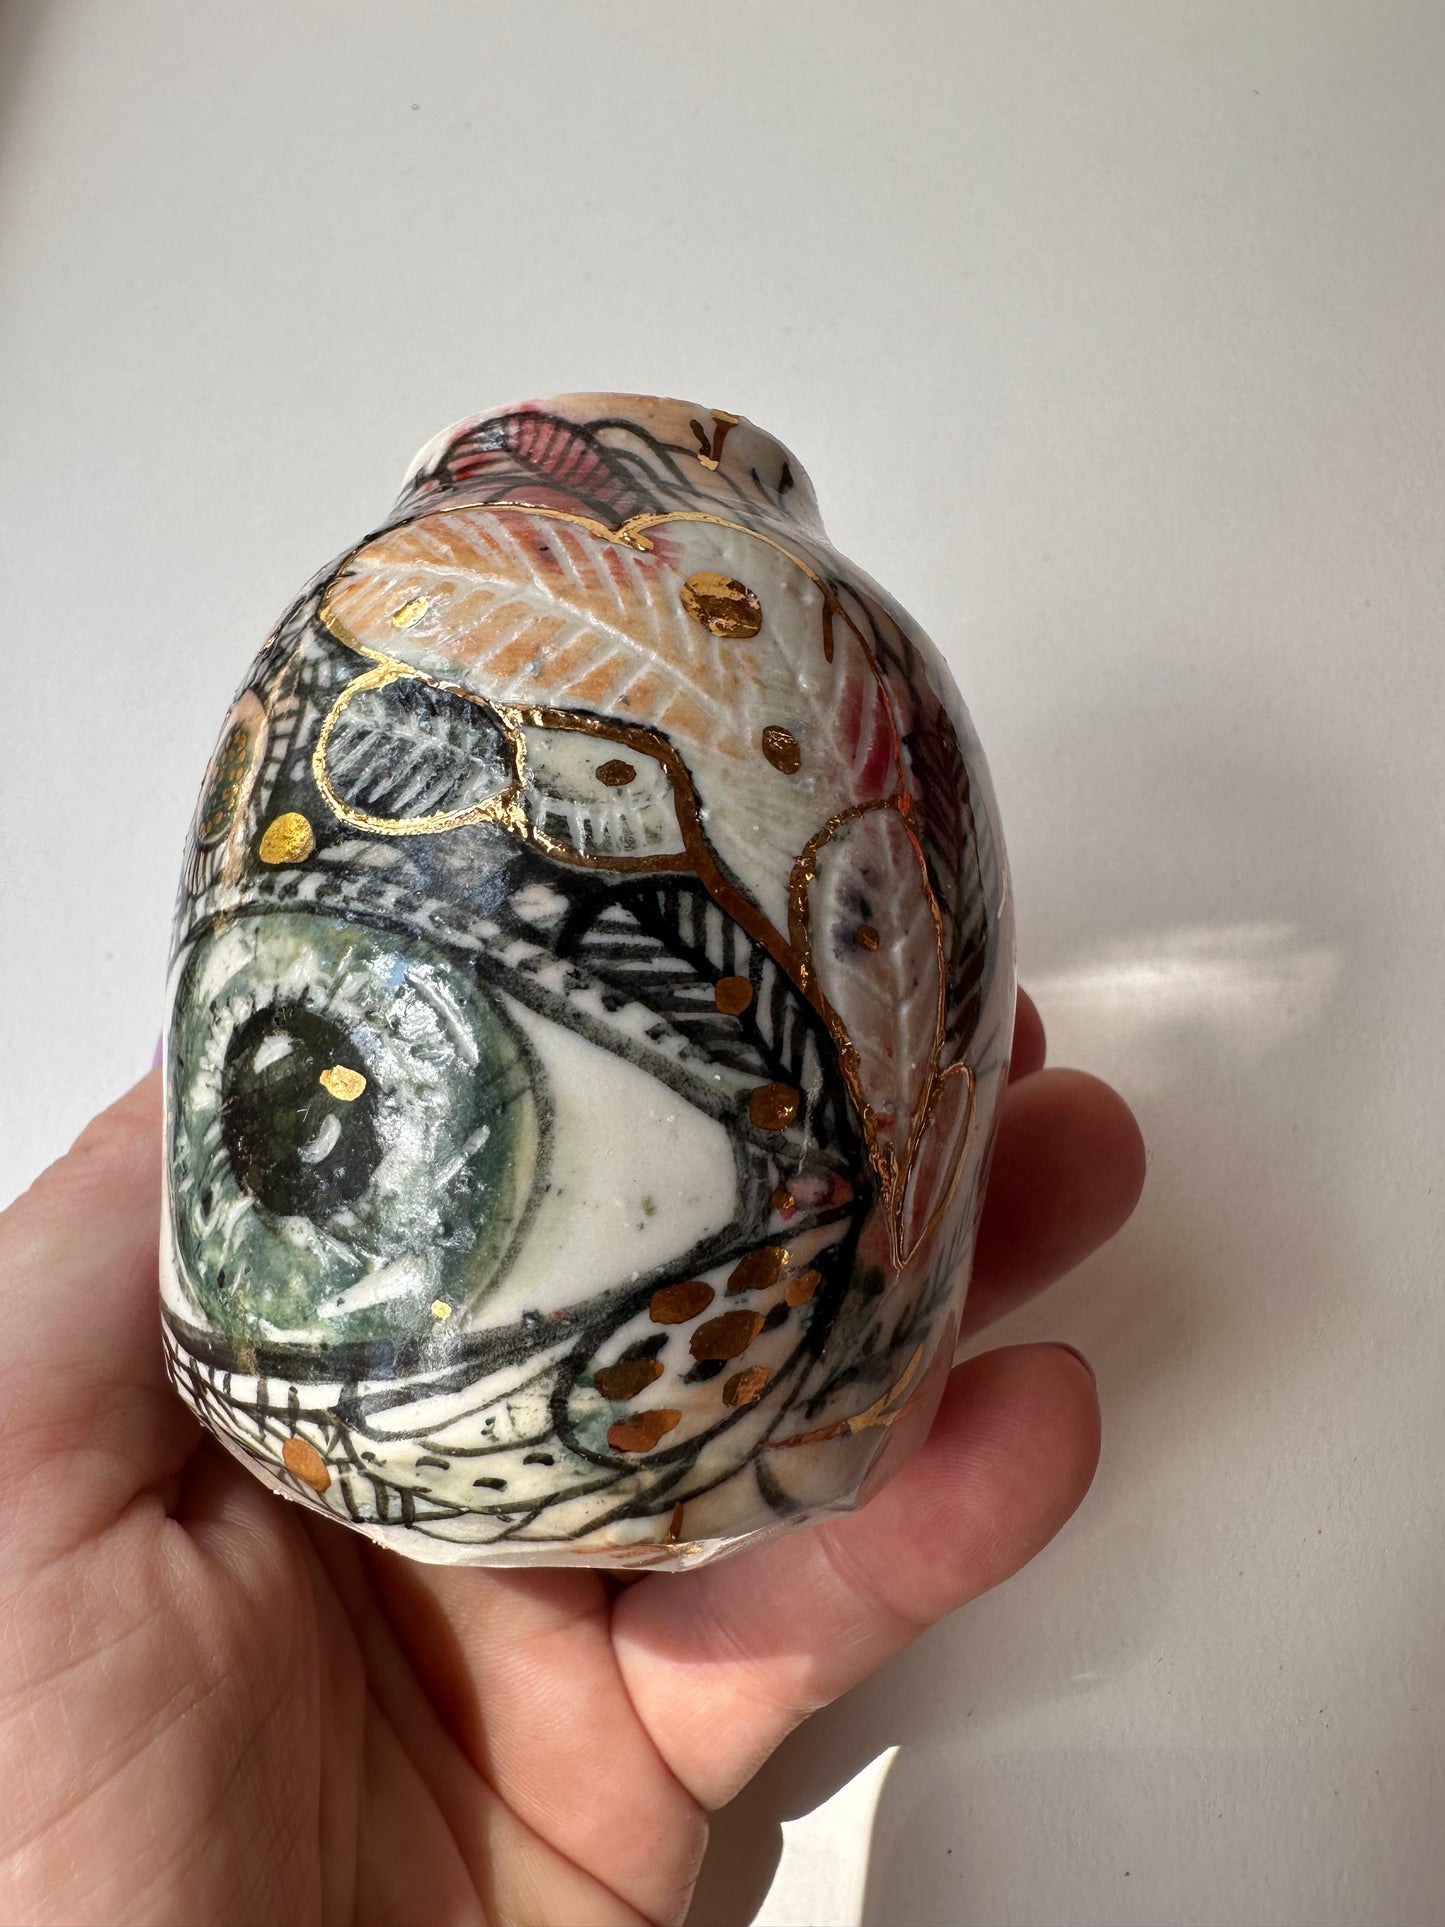 ‘Hand painted ‘the protective eye’ vase